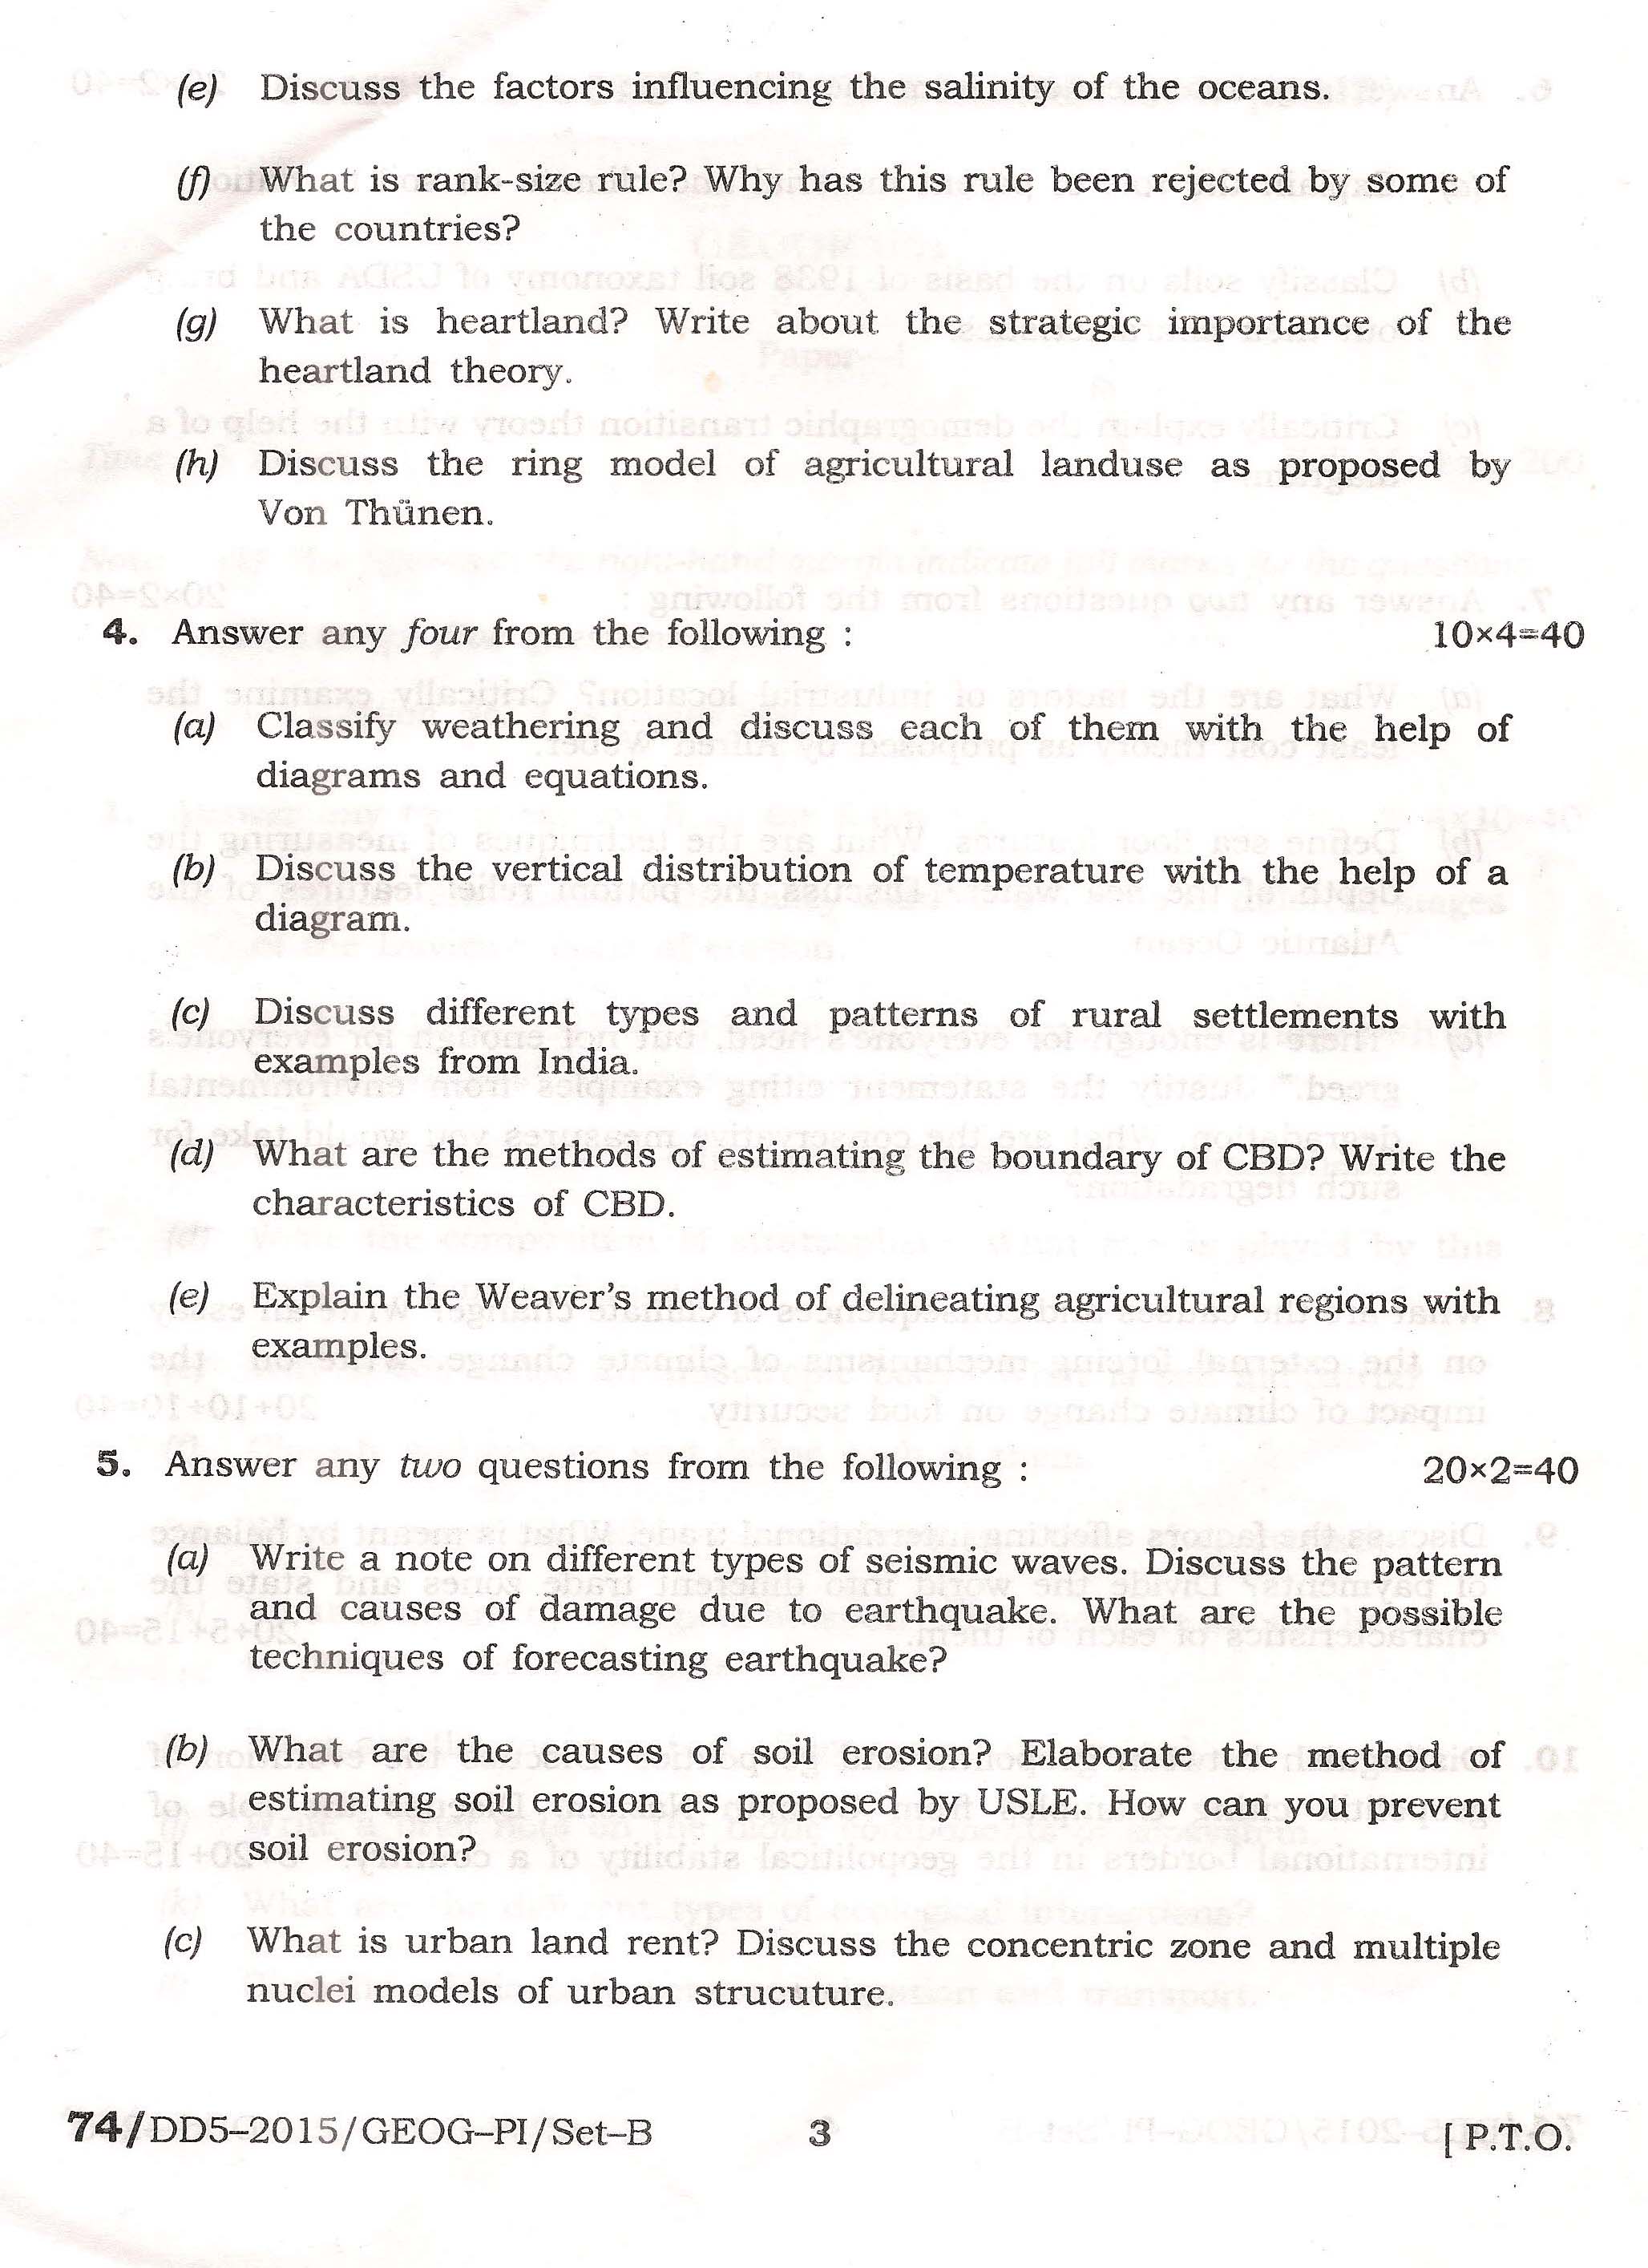 APPSC Combined Competitive Main Exam 2015 Geography Paper I 3